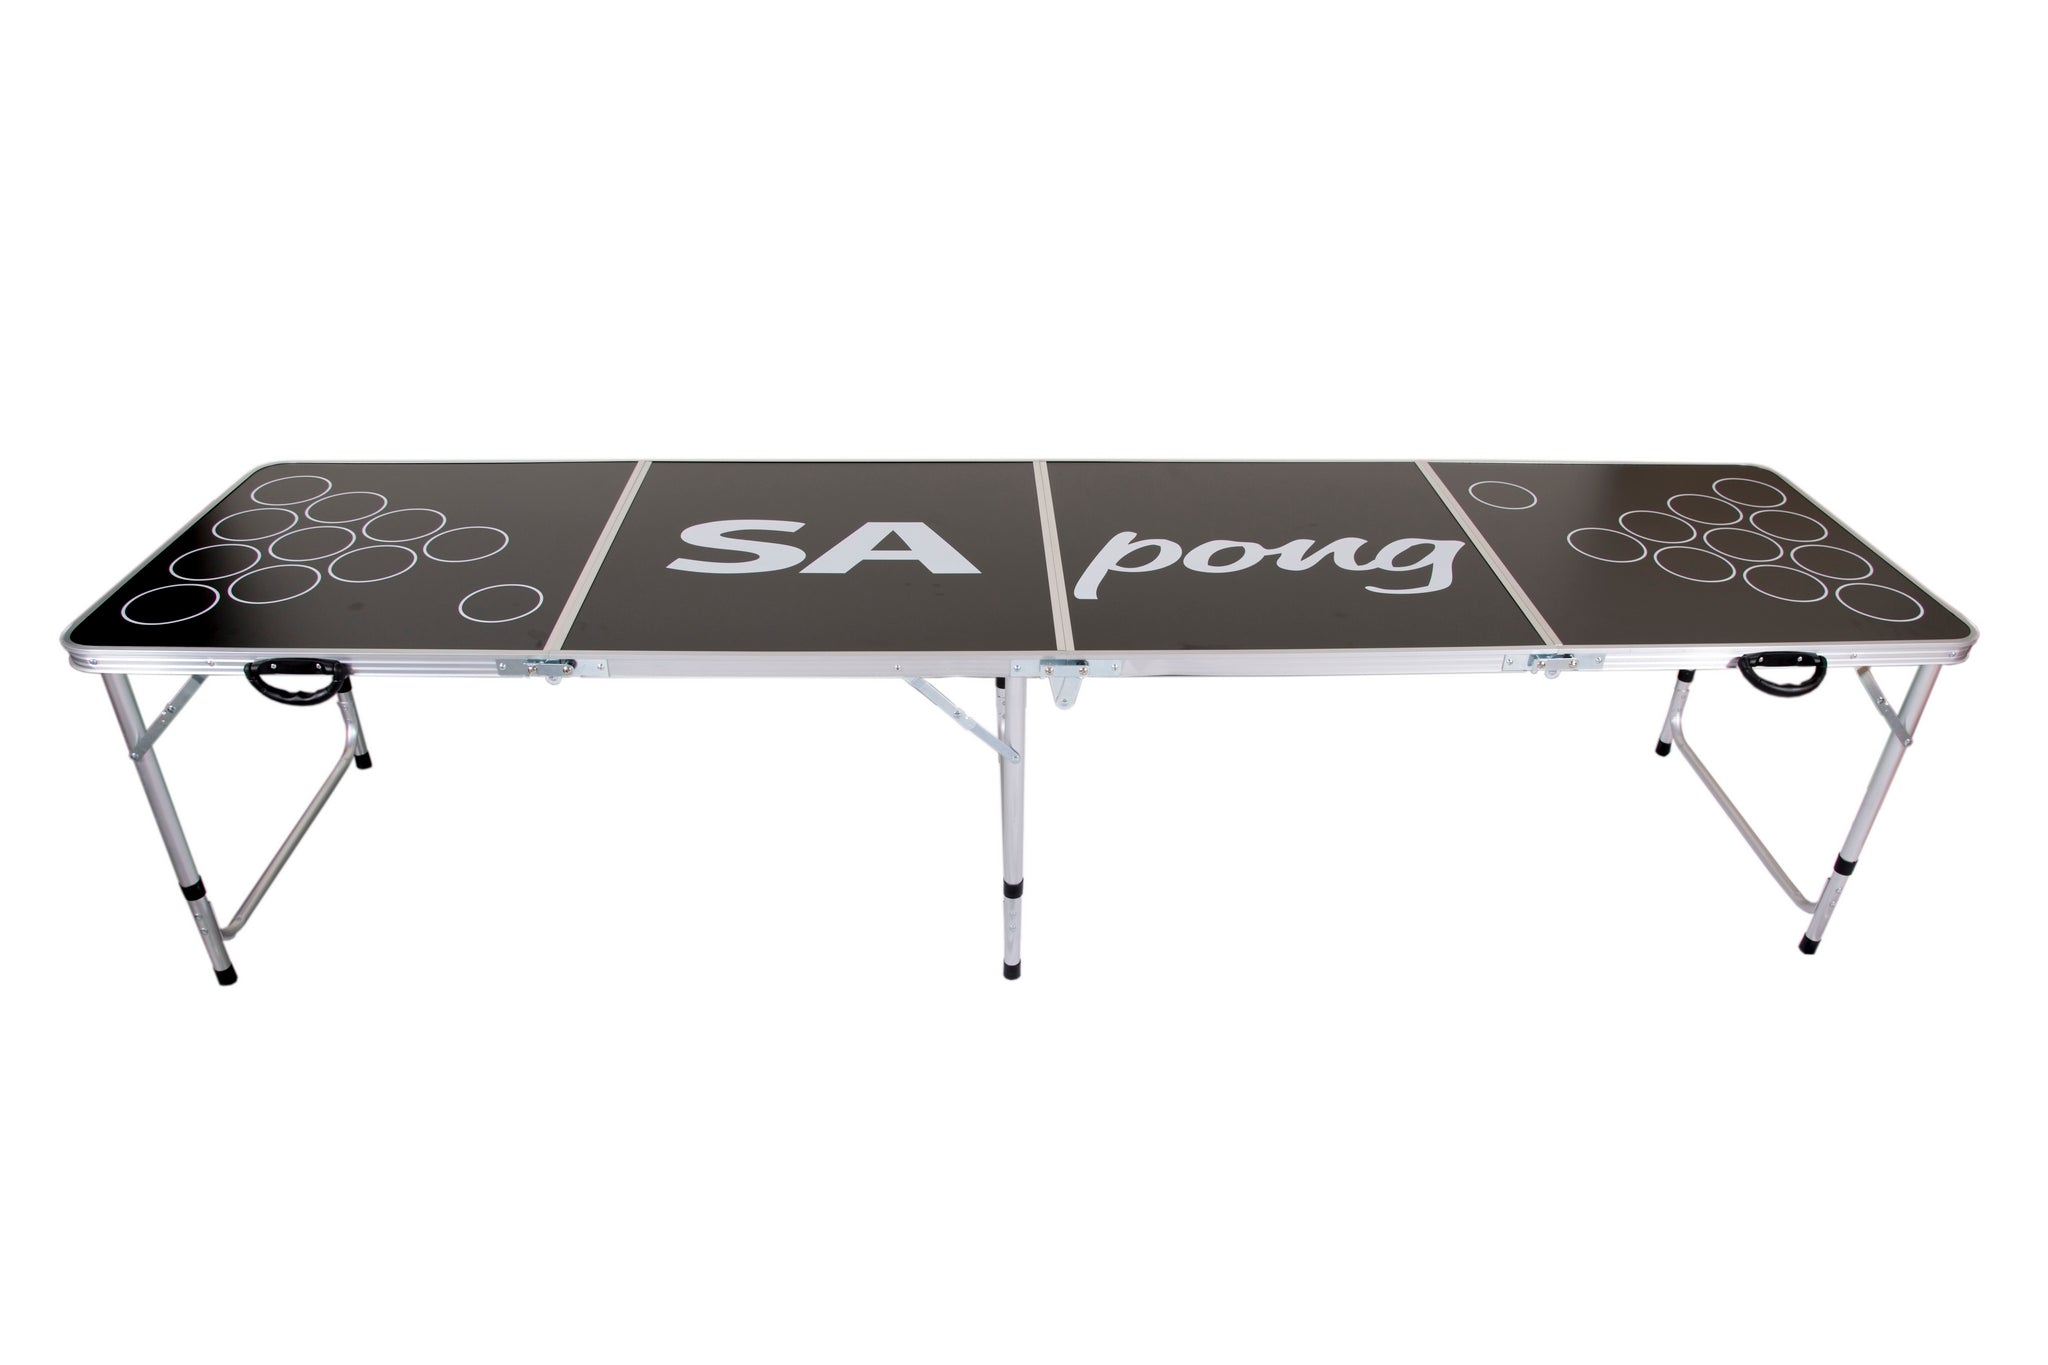 Beer Pong Folding Table